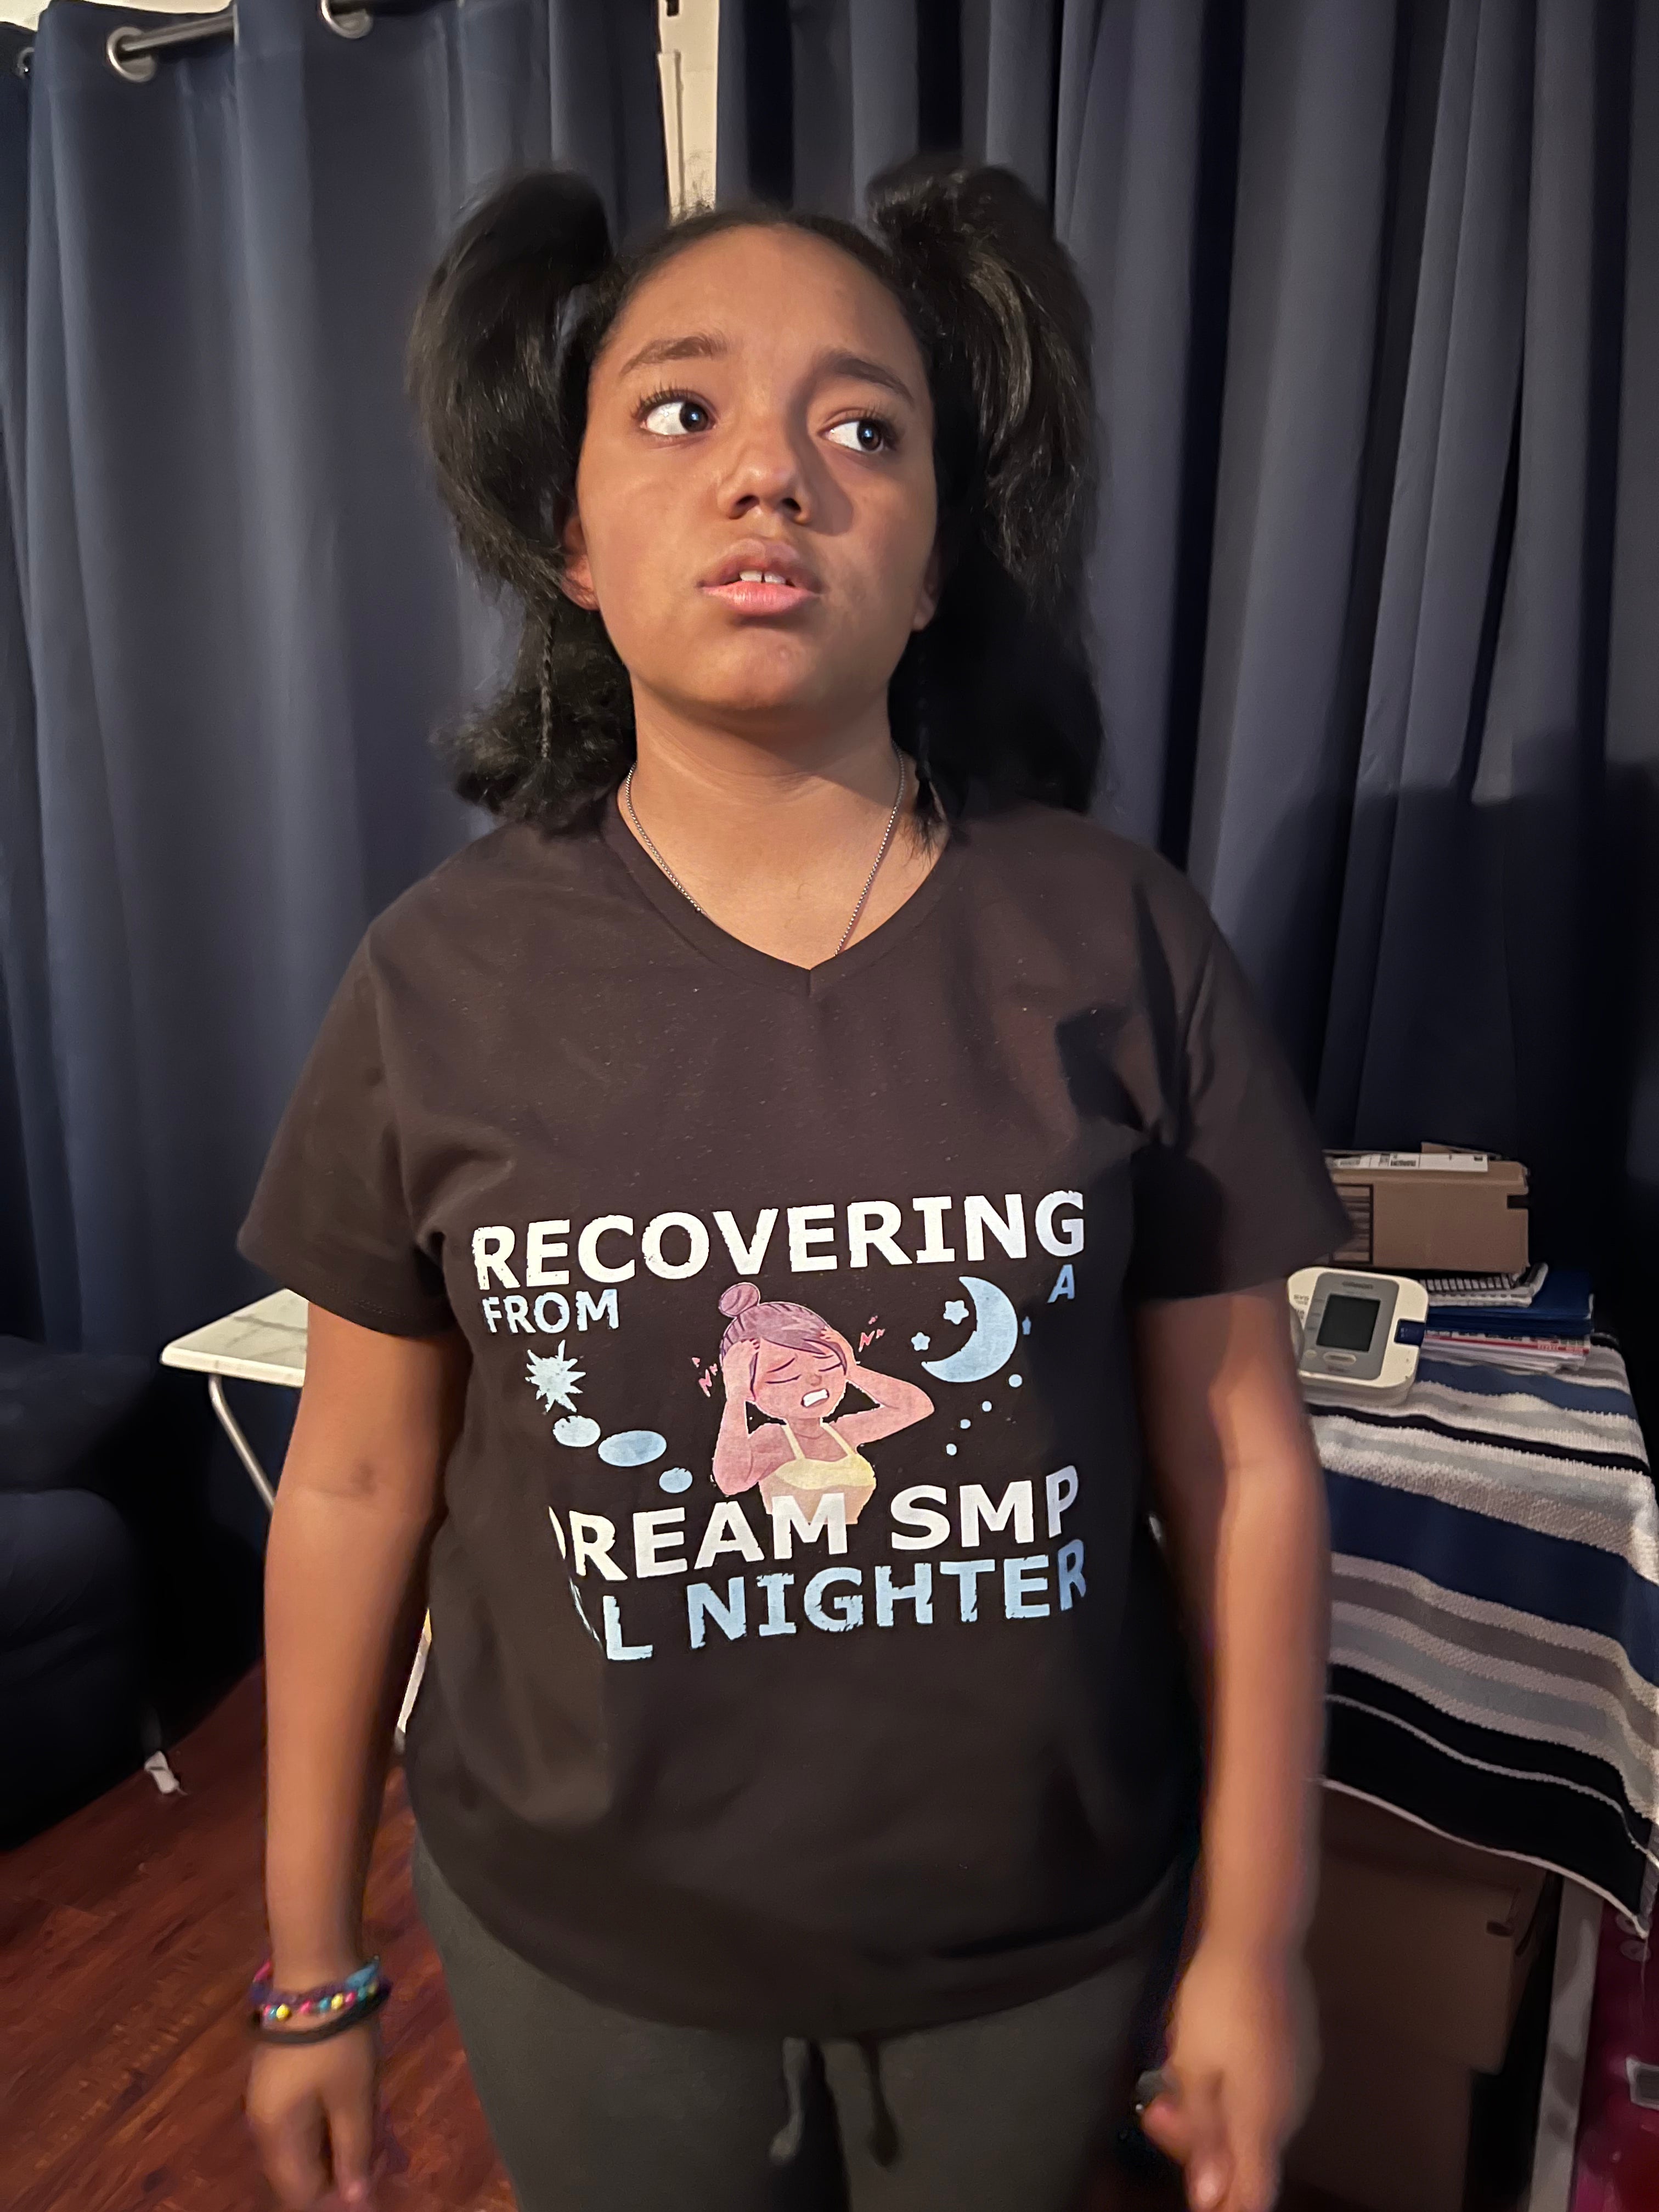 Recovering from a Dream SMP all nighter T-shirt